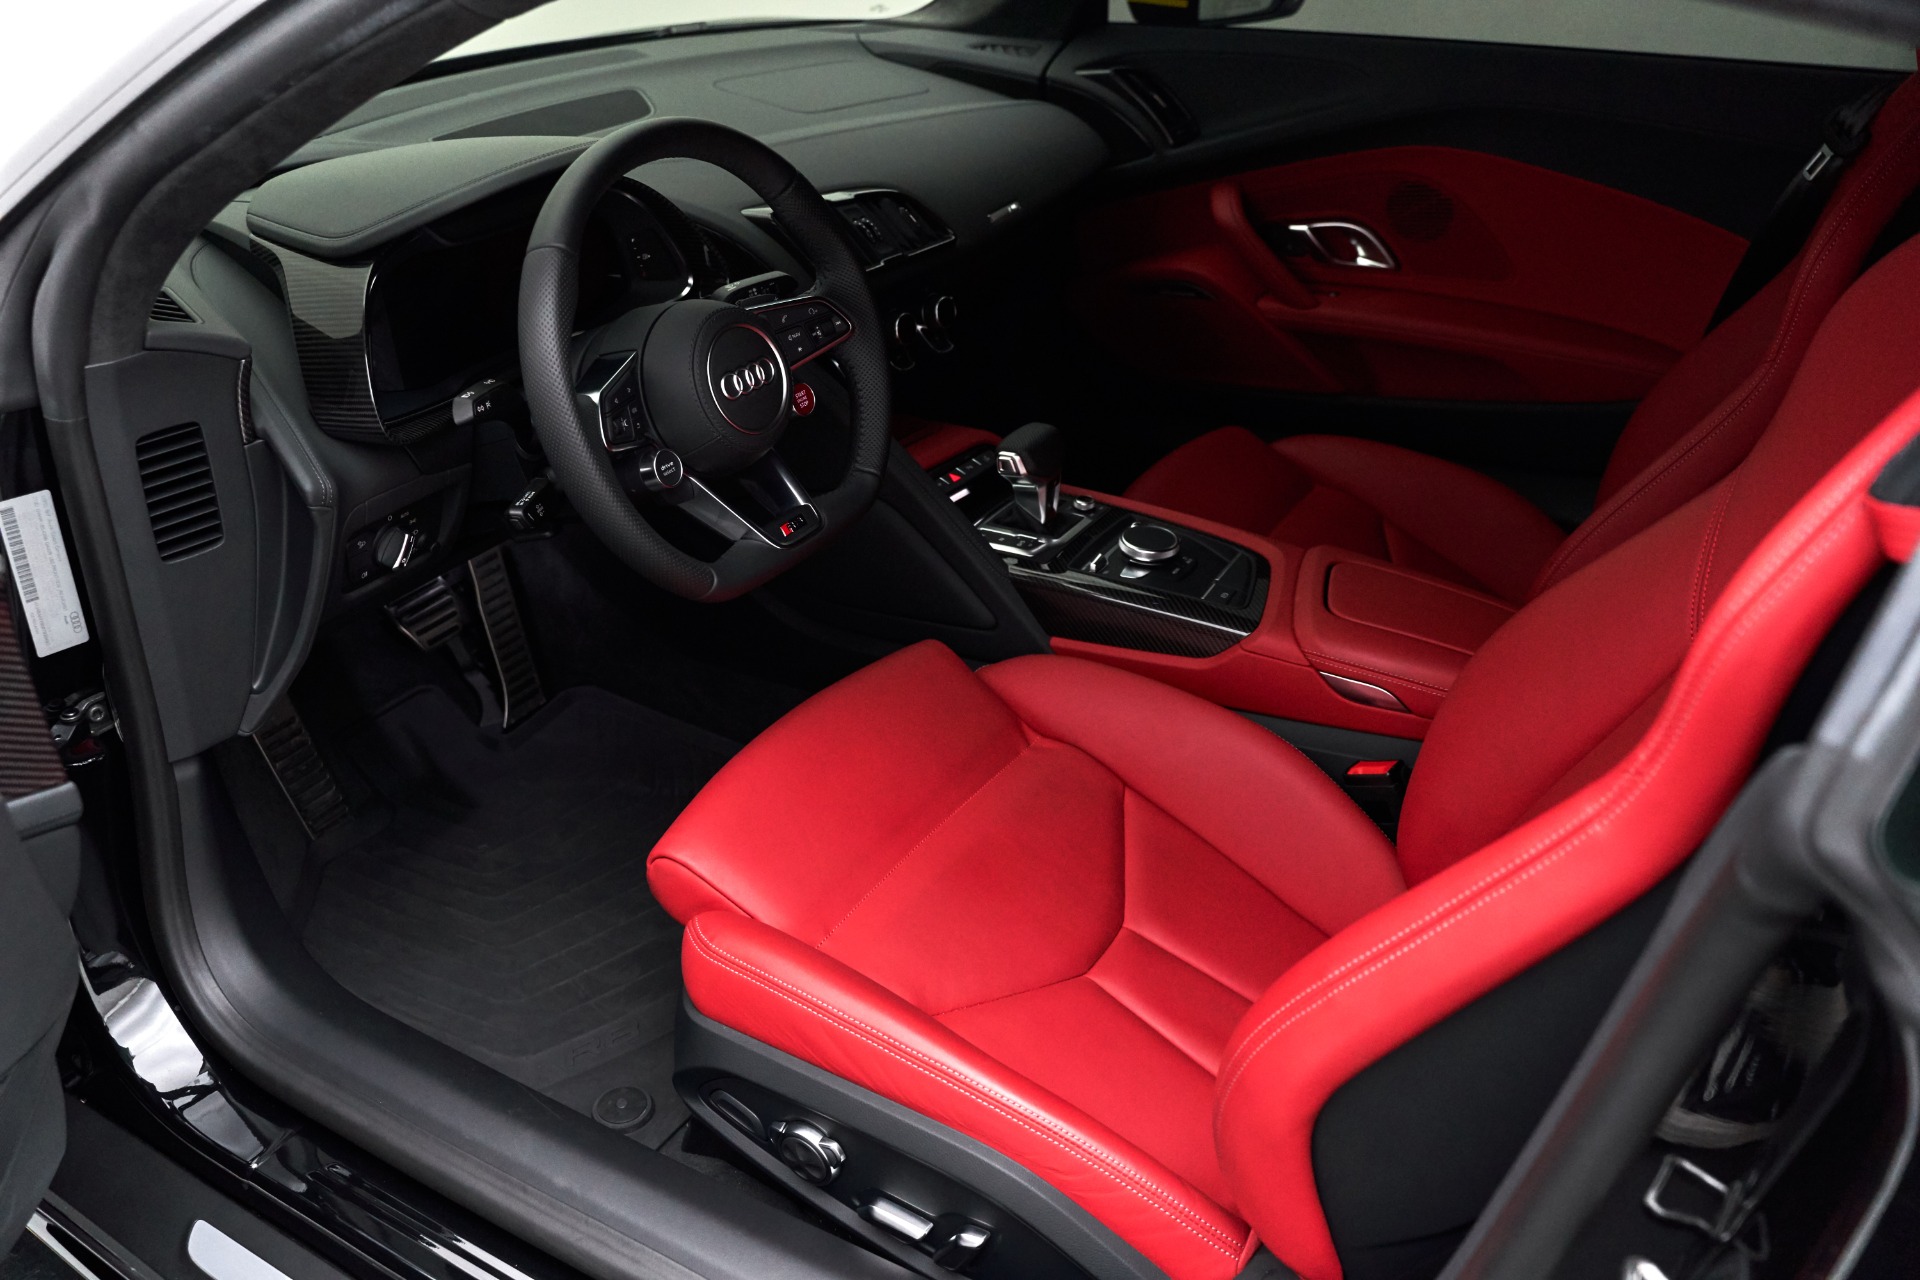 Audi R8 Interior Images & Photos - See the Inside of the Latest Audi R8 |  CarsGuide